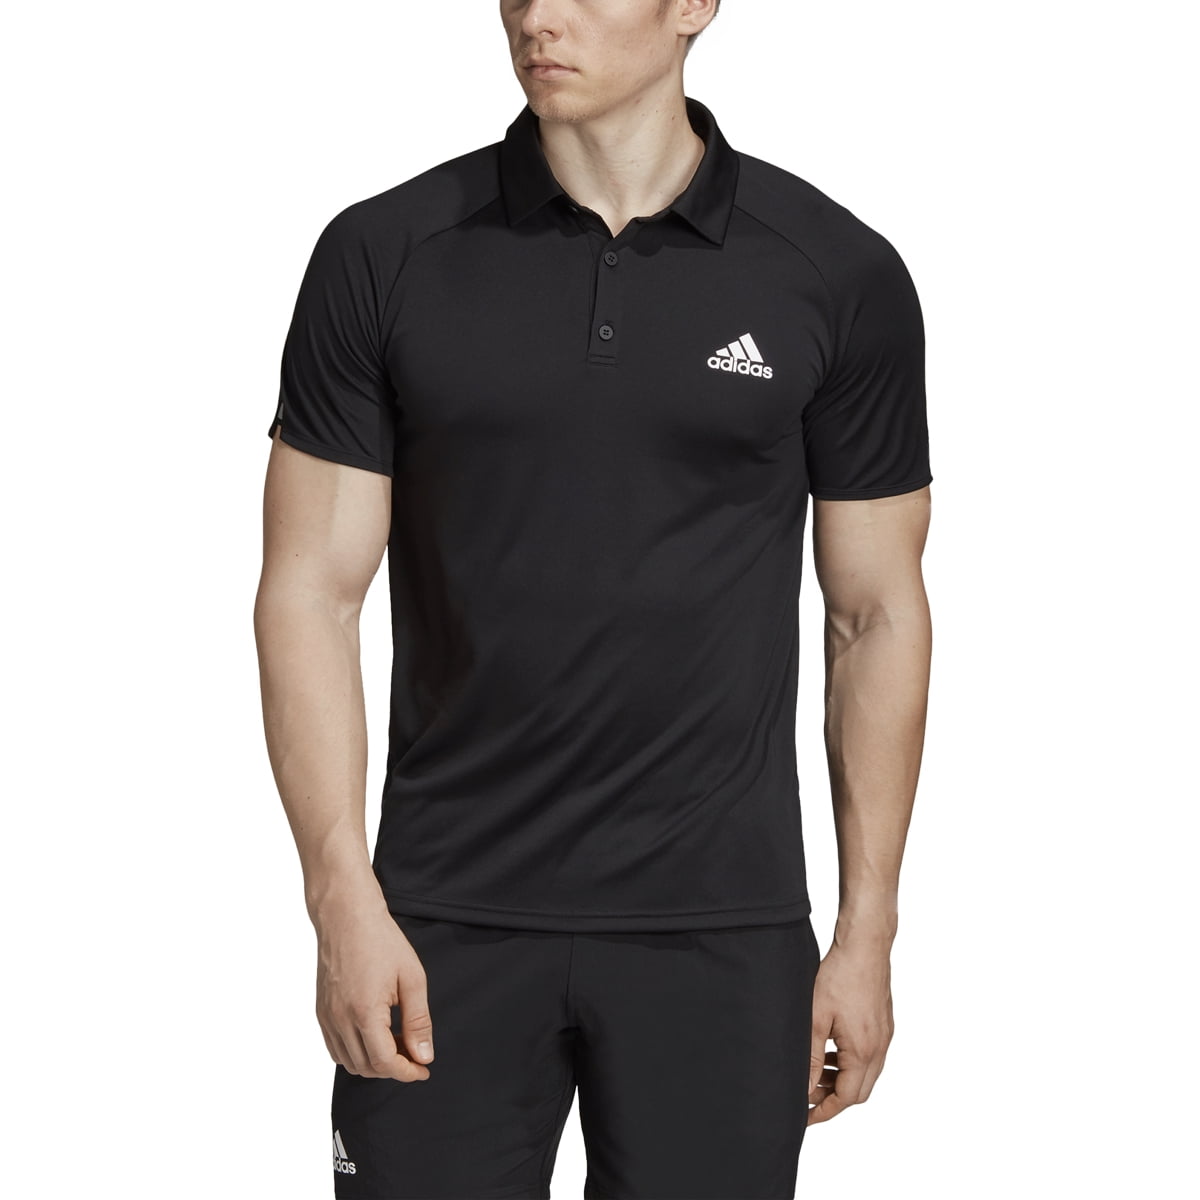 Adidas Club Color Block Tennis Polo Shirt Adidas - Ships Directly From ...